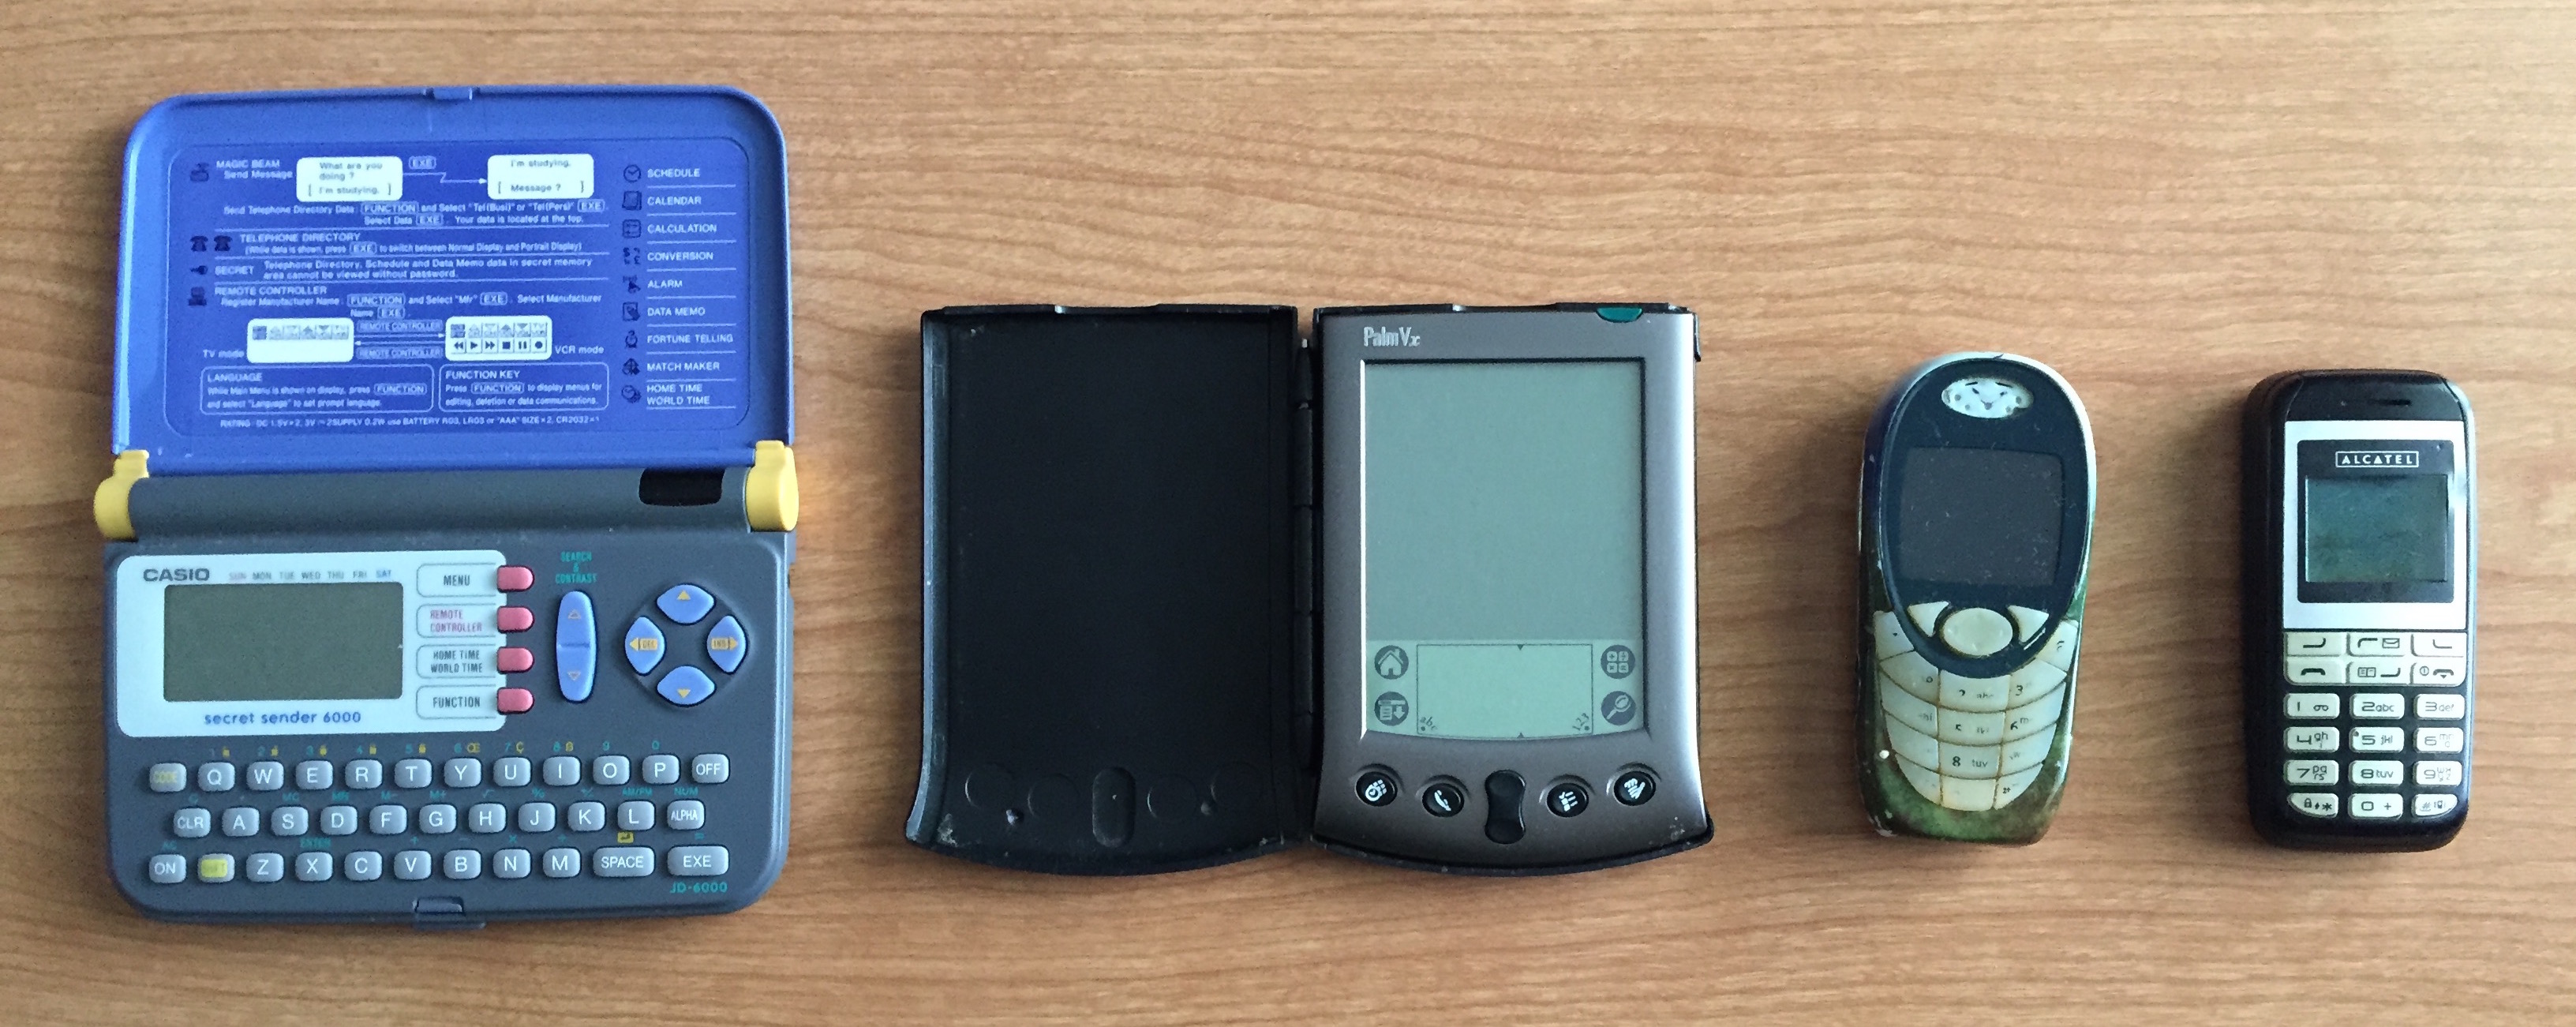 My first devices alternate view. From left to right -- Secret Sender, Palm Pilot, Siemens, Alcatel.